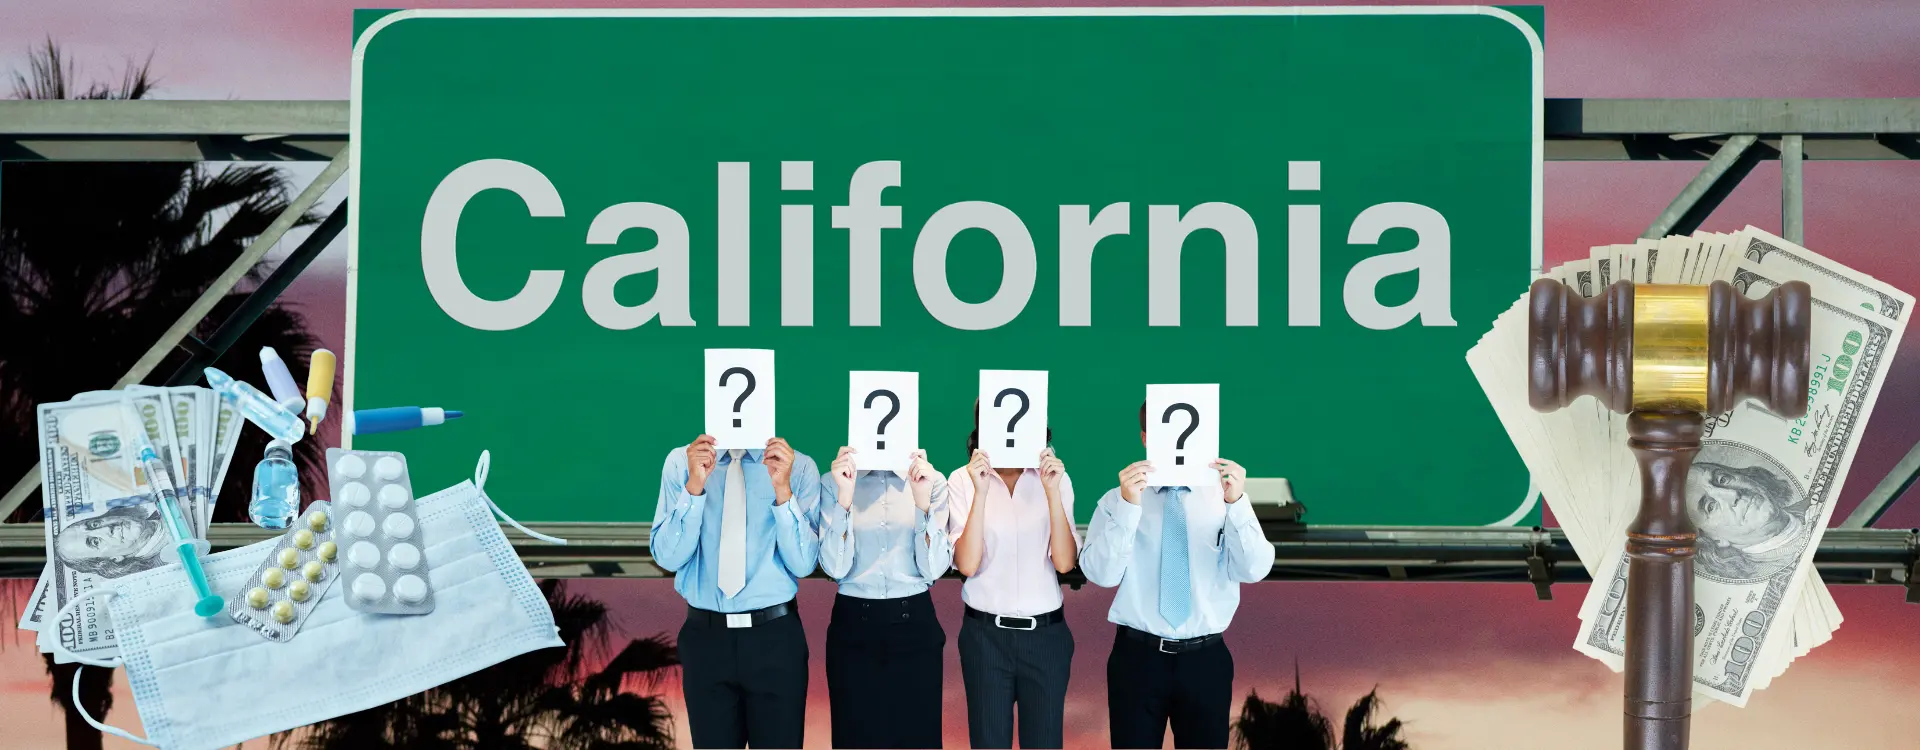 california financial responsibility law who will pay for your medical care